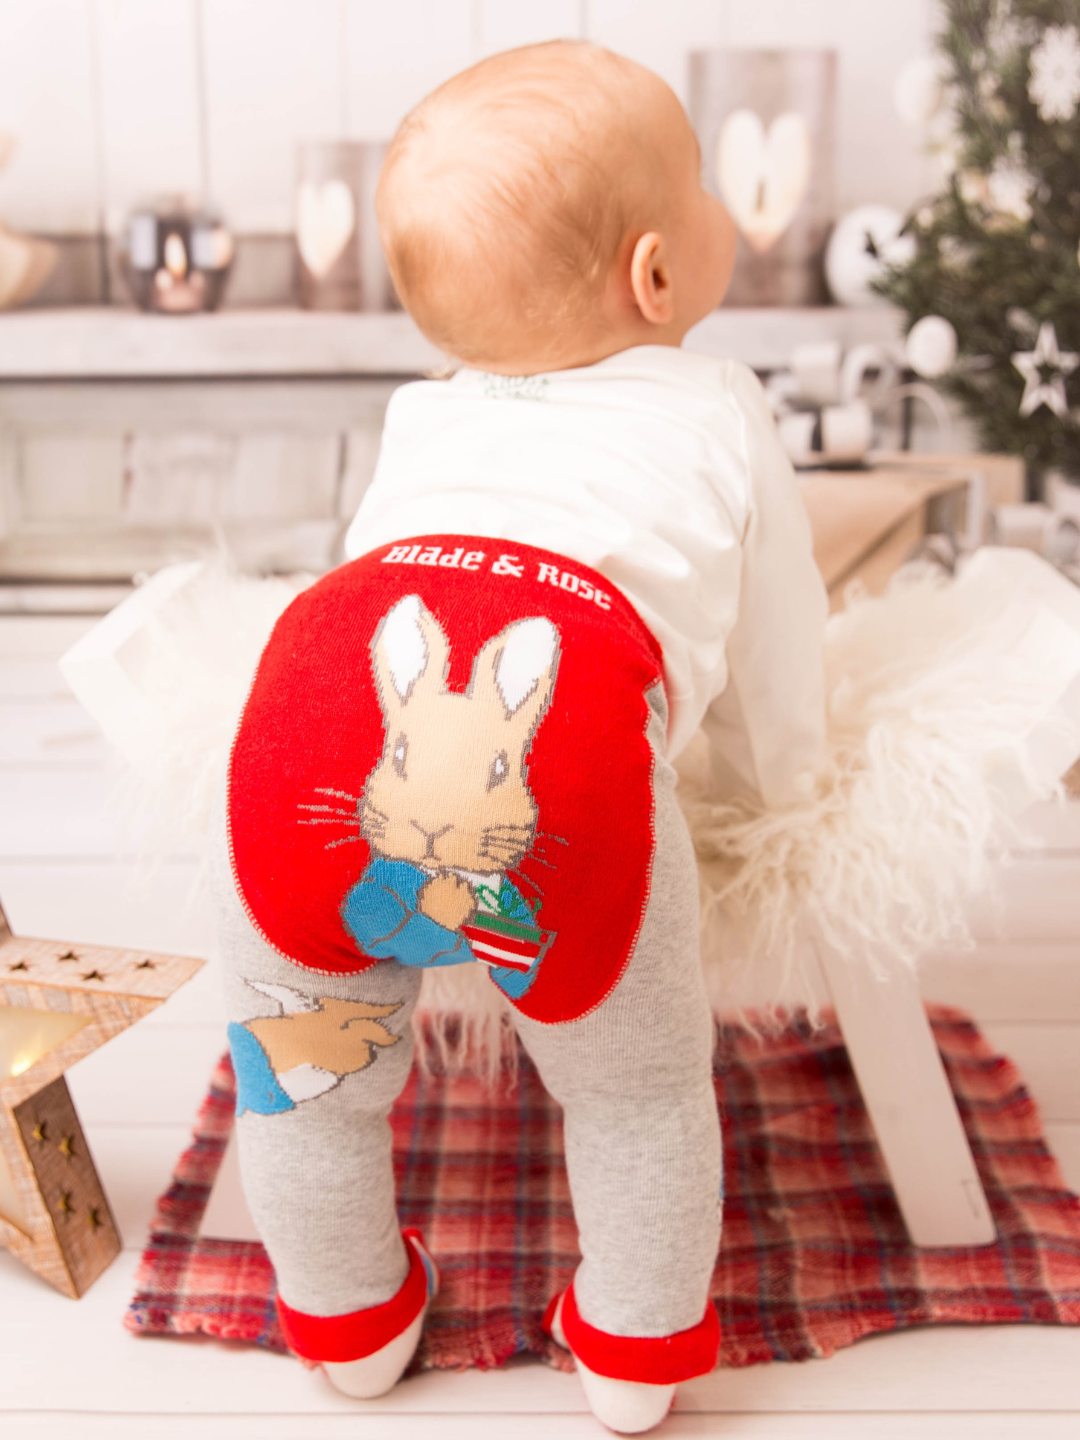 Peter Rabbit™ Festive Outfit (3PC) Blade & Rose UK